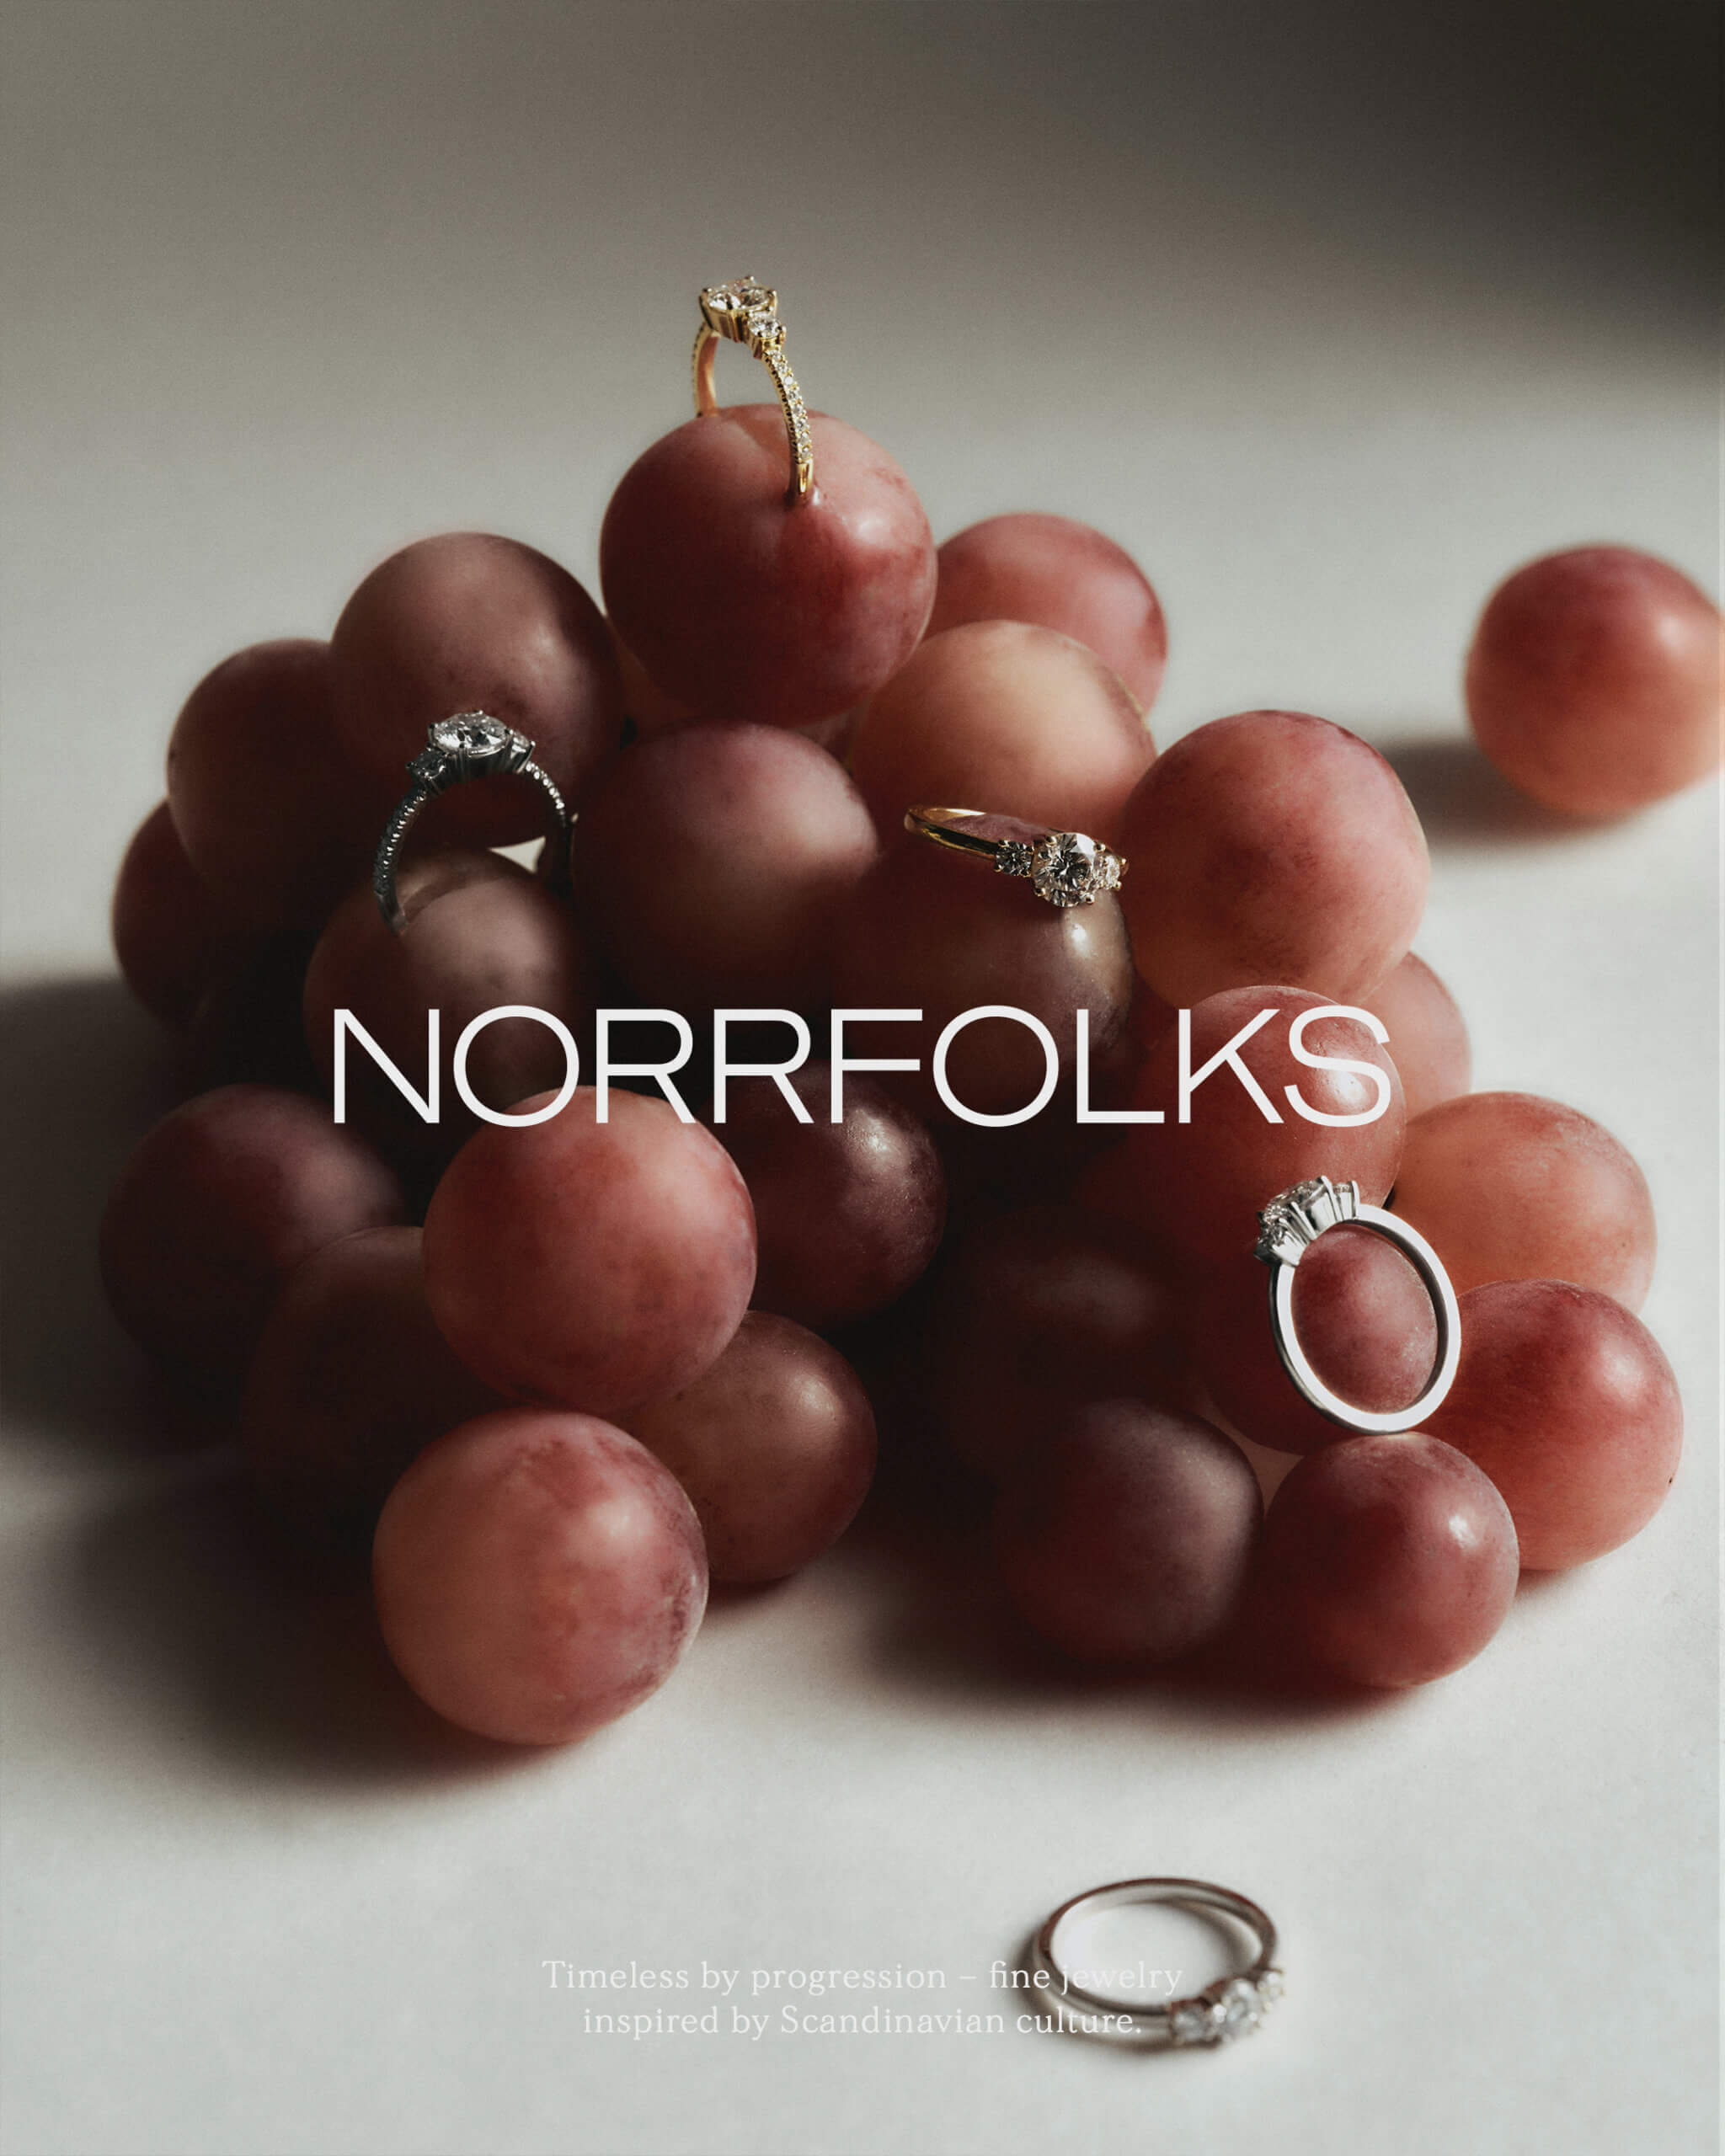 Norrfolks - Art and creative direction